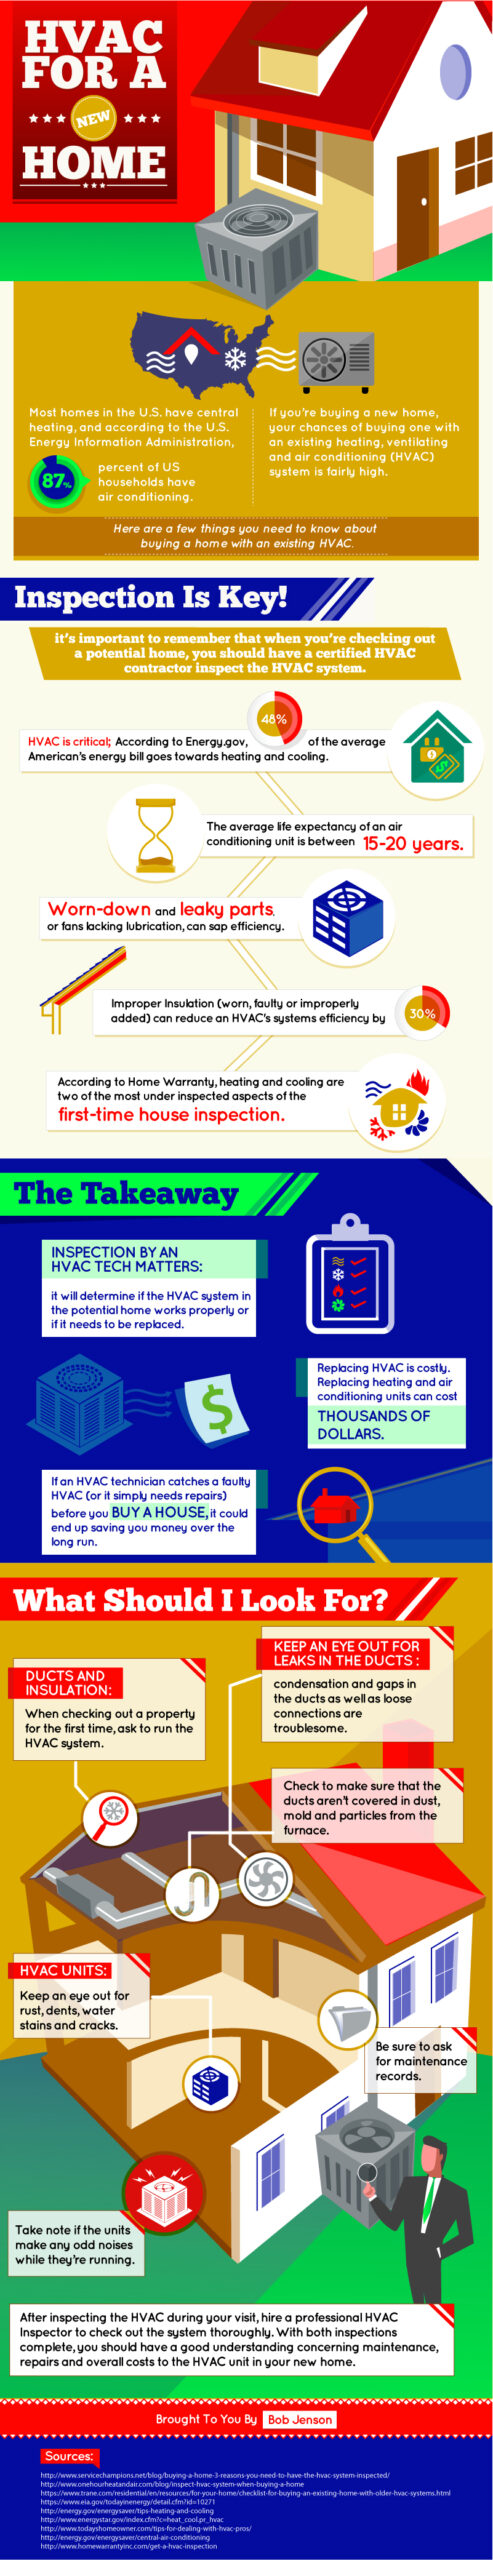 Infographic focusing in on how to inspect HVAC in a new home and what to look for